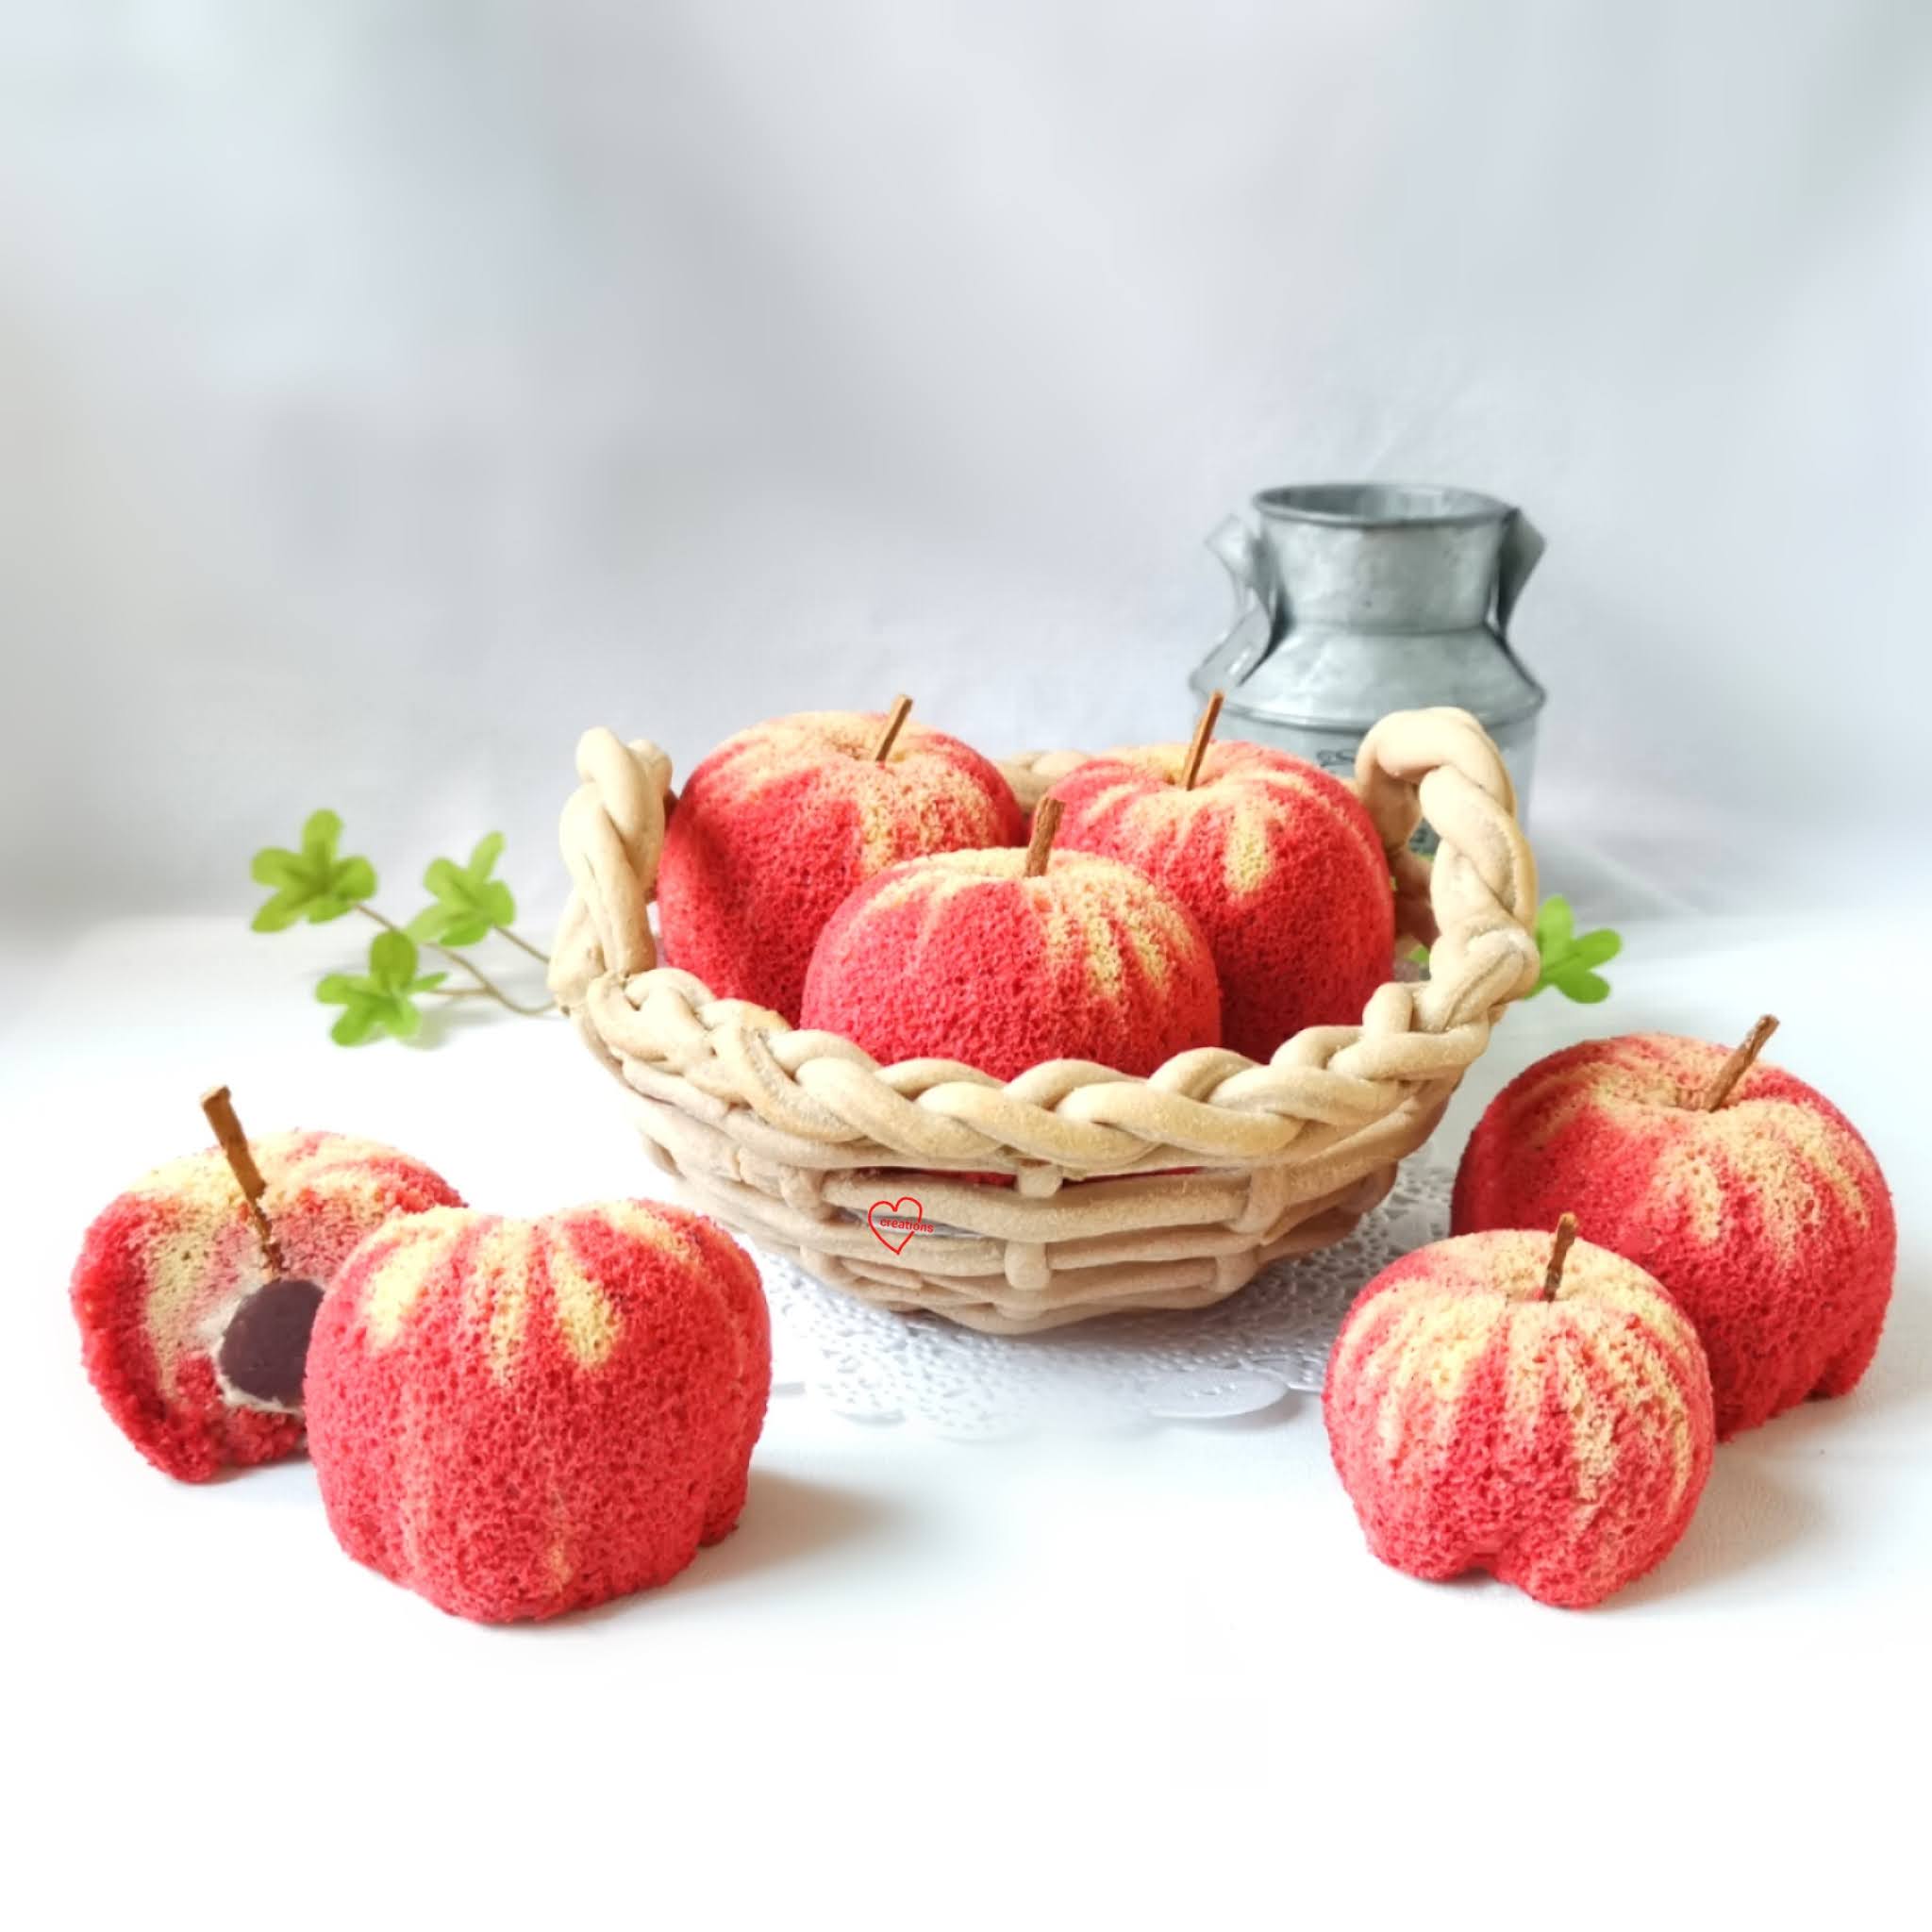 Loving Creations for You: Apple Black Tea Chiffon Cake 'Apples' in Biscuit  Basket